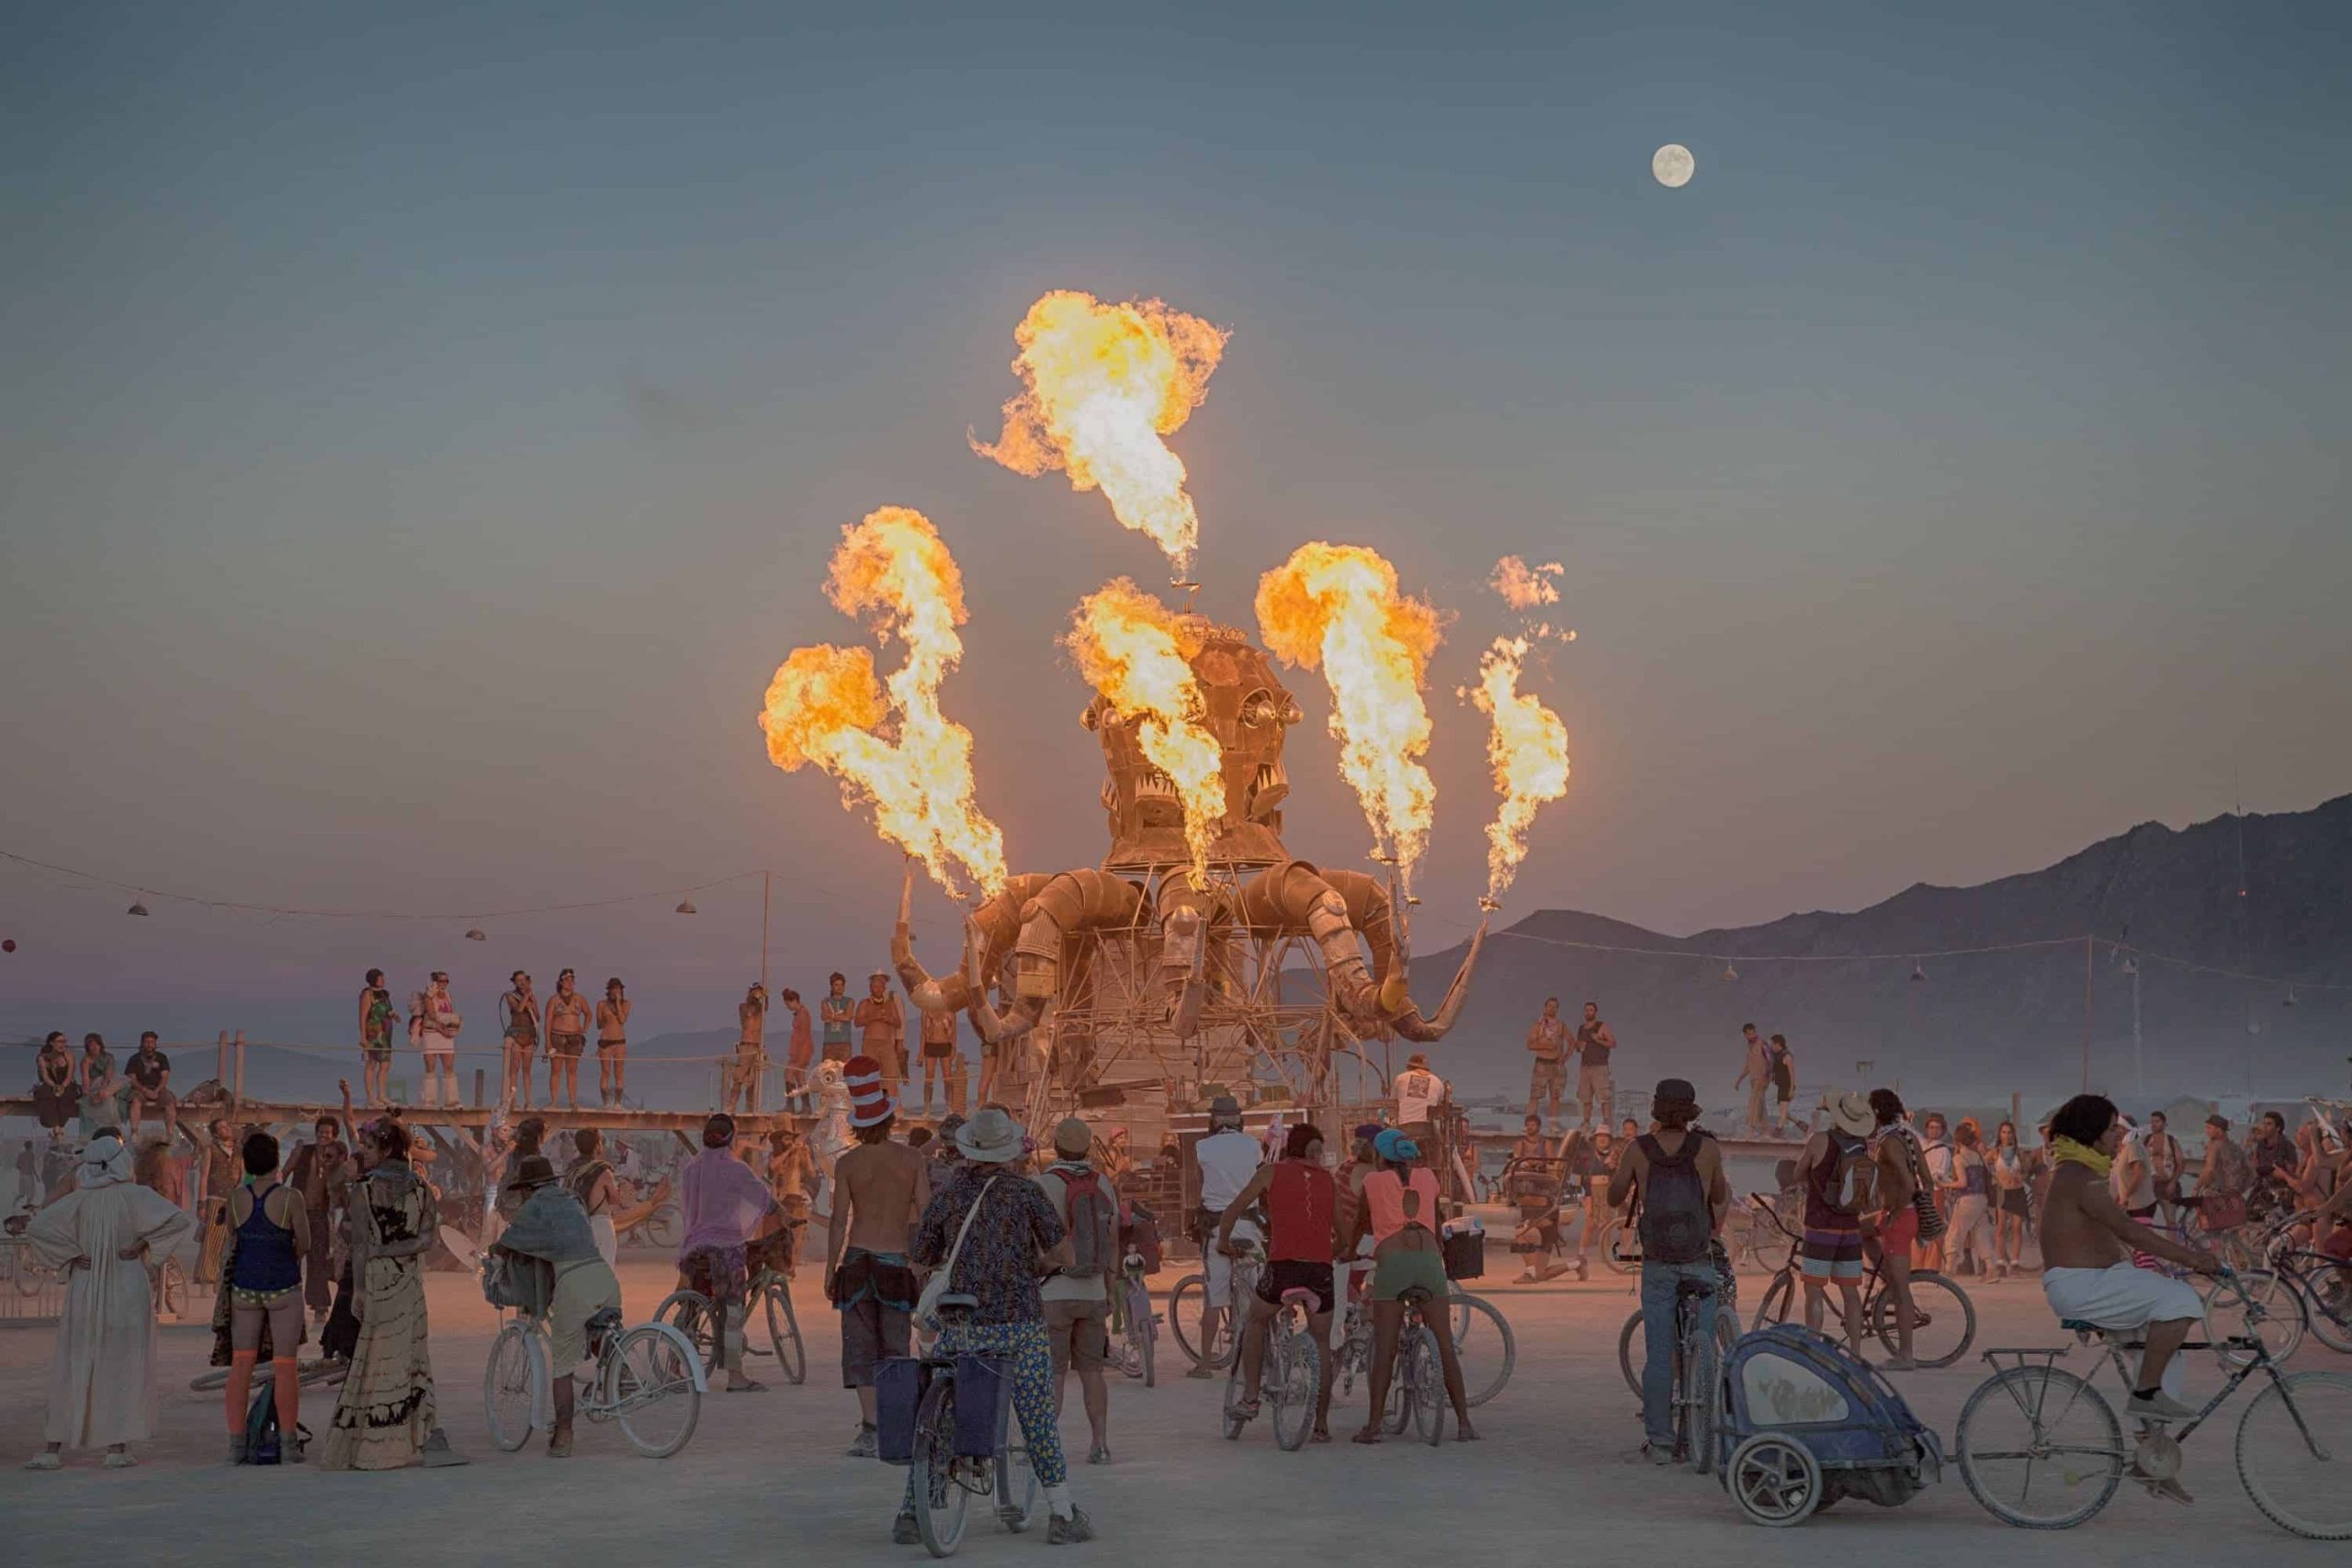 Burning Man selling NFTs and auctioning sculptures to save their organization